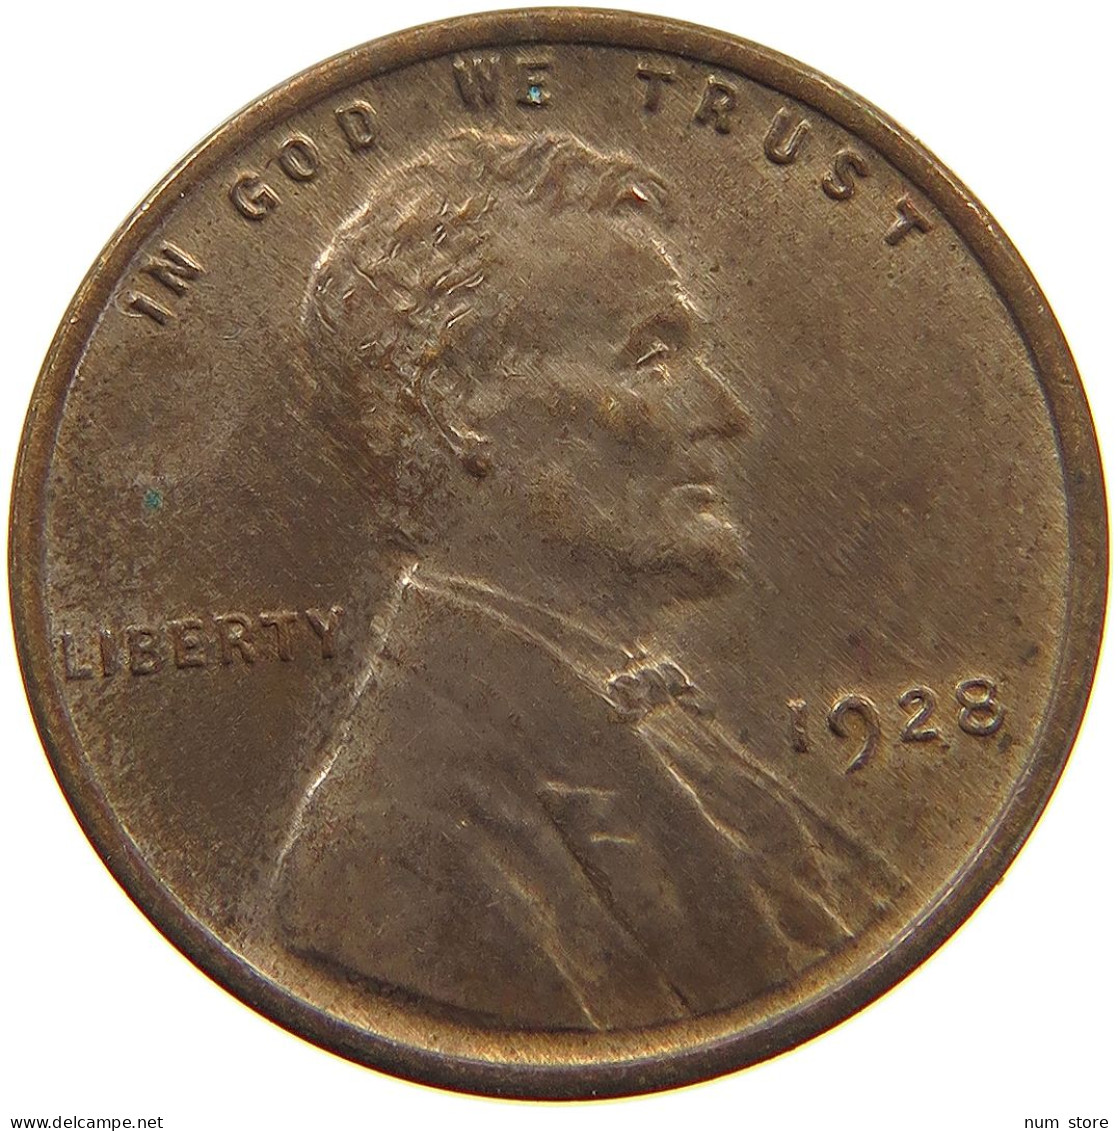 UNITED STATES OF AMERICA CENT 1928 Lincoln Wheat #t117 1129 - 1909-1958: Lincoln, Wheat Ears Reverse